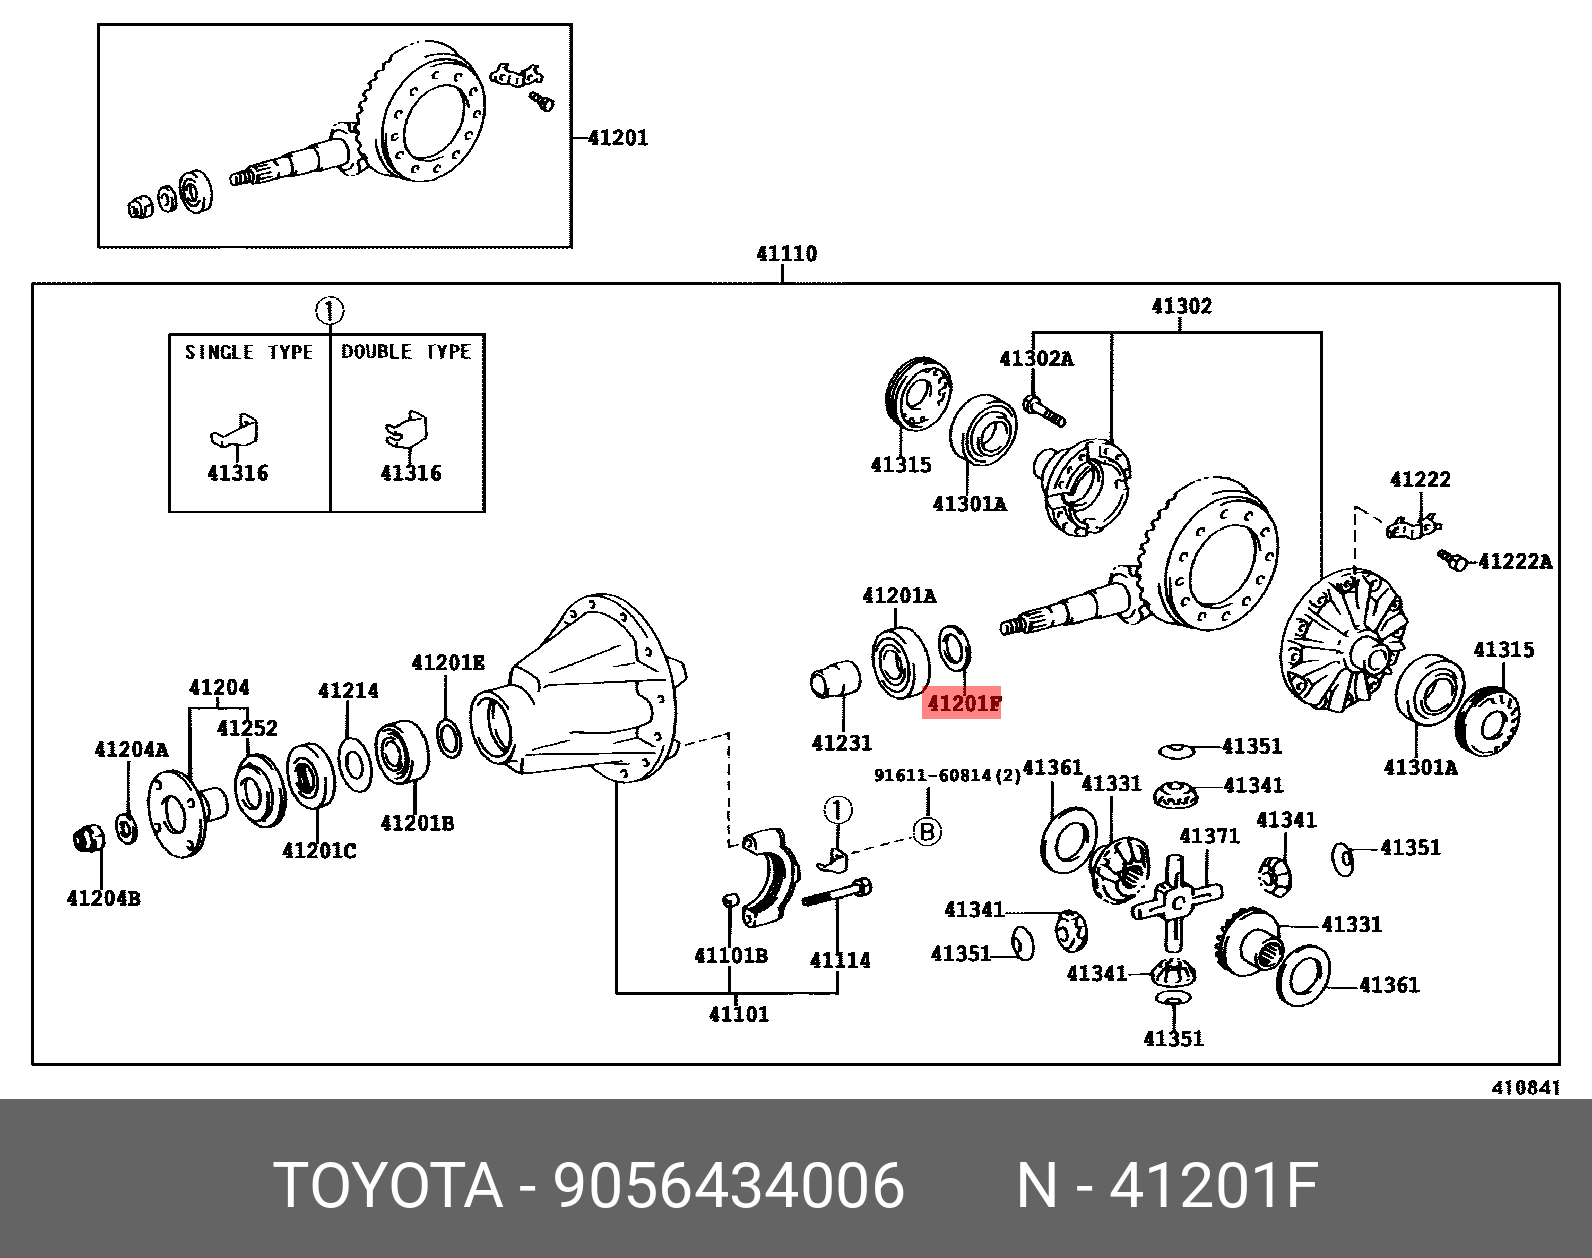 9056434006, HARRIER 200302-201207, ACU3#, MCU3#, GSU3#, WASHER, PLATE (FOR REAR DIFFERENTIAL DRIVE PINION)